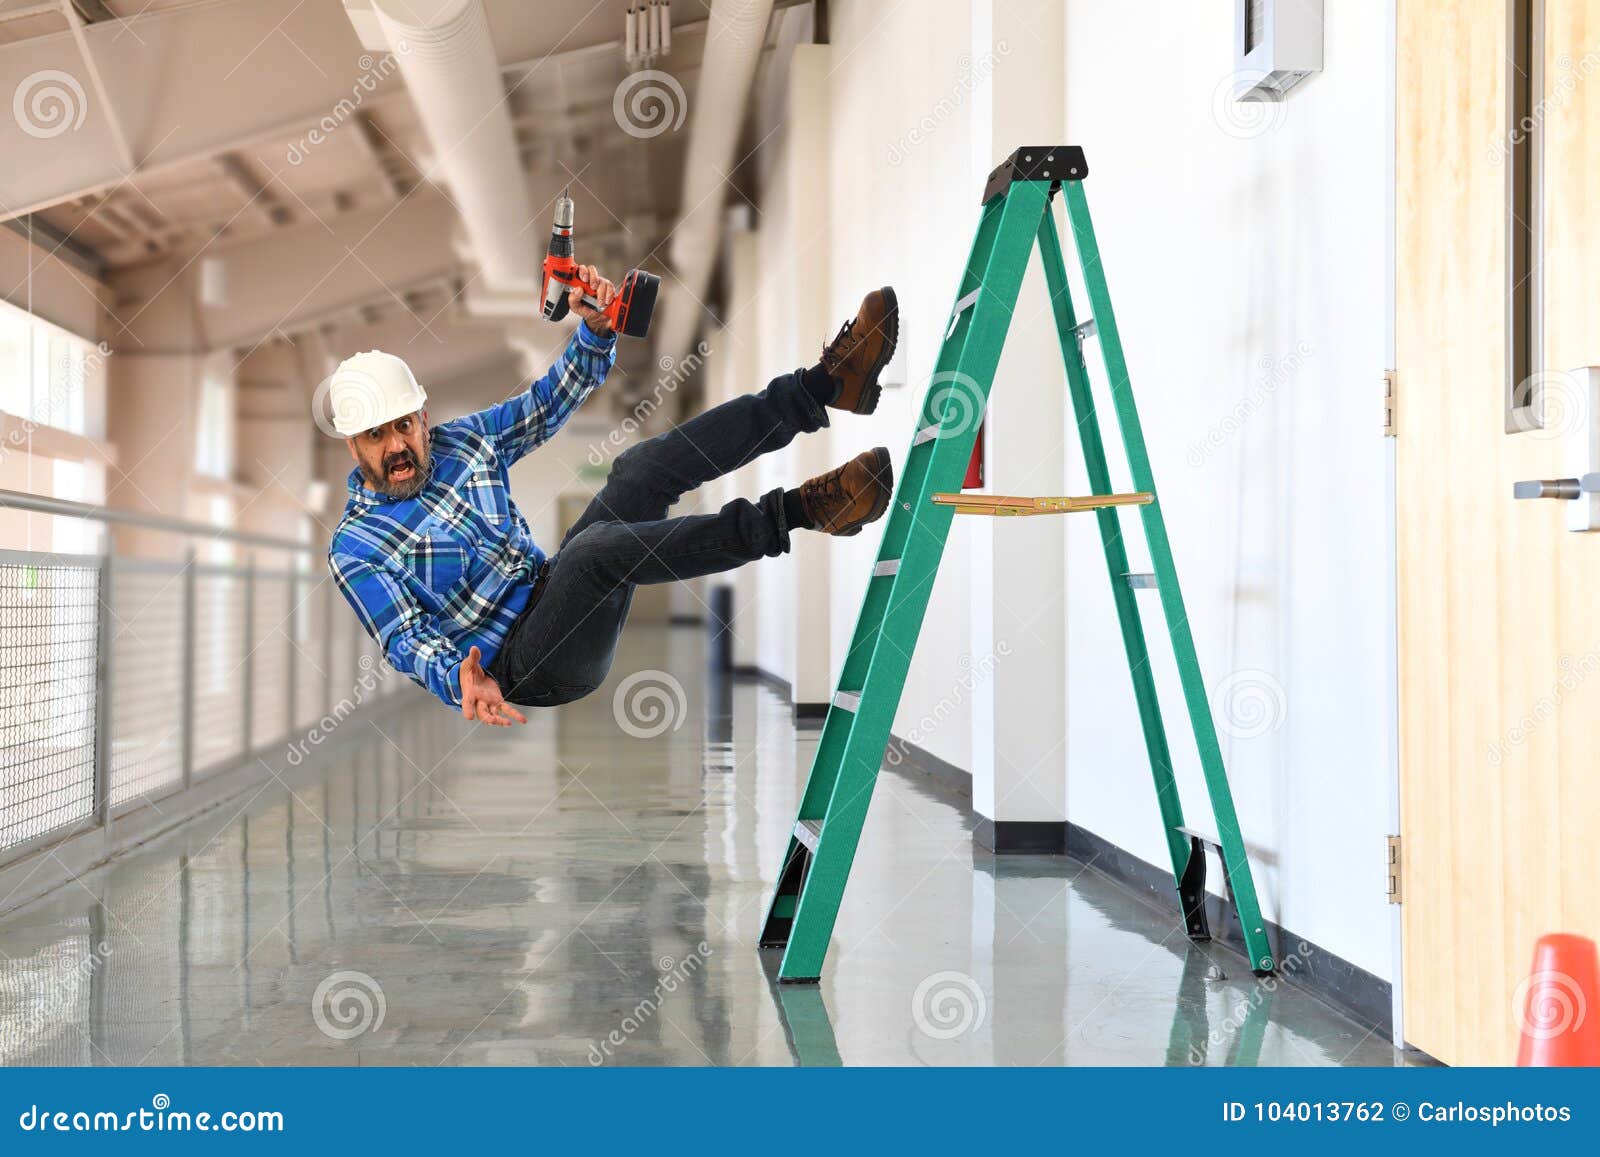 construction worker falling off the ladder